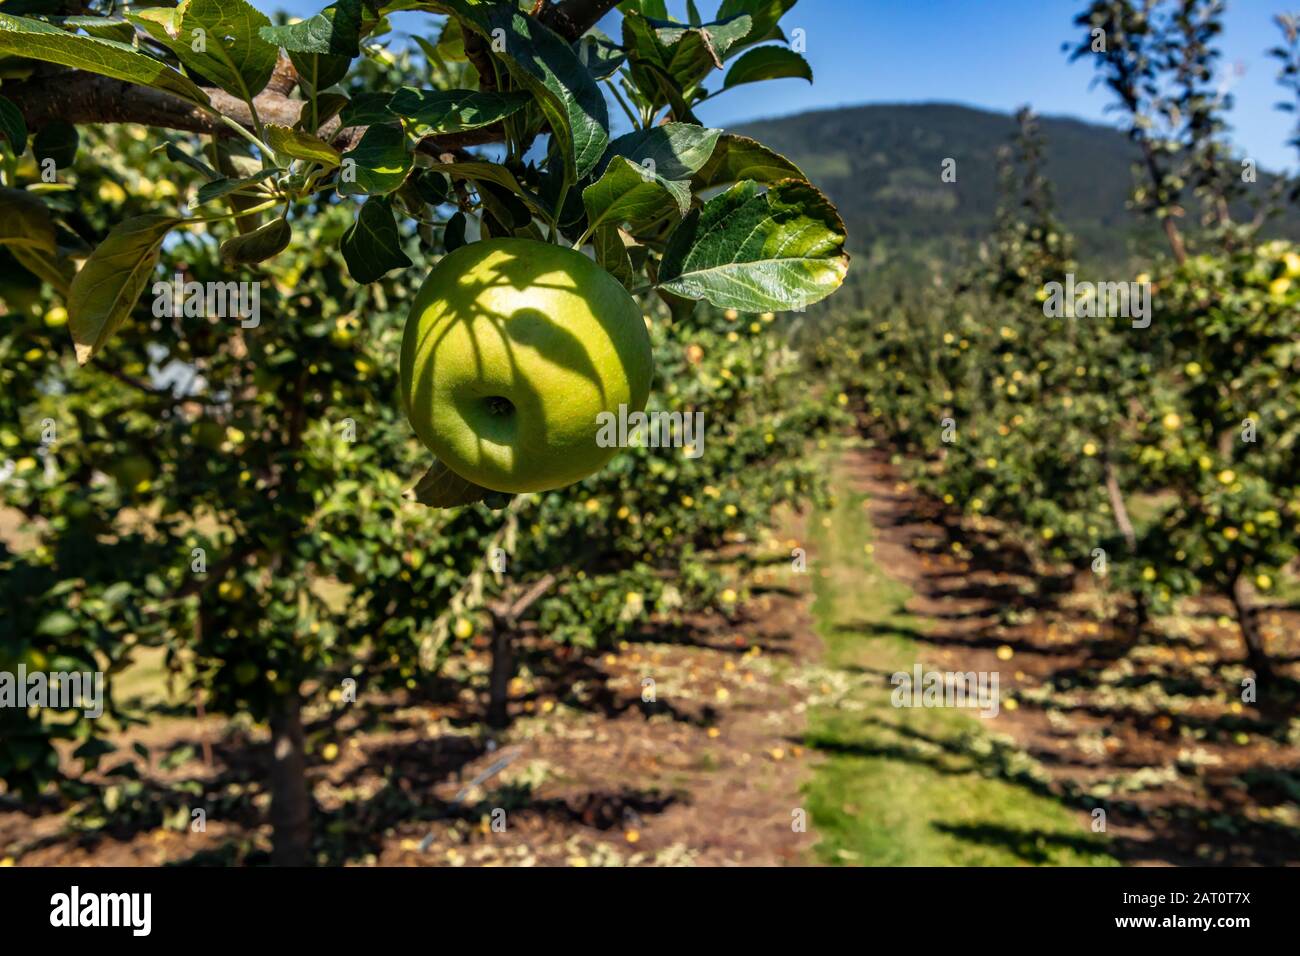 Green apple on the tree branch close up and selective focus view against orchard trees background, Okanagan Valley, British Columbia, Canada Stock Photo